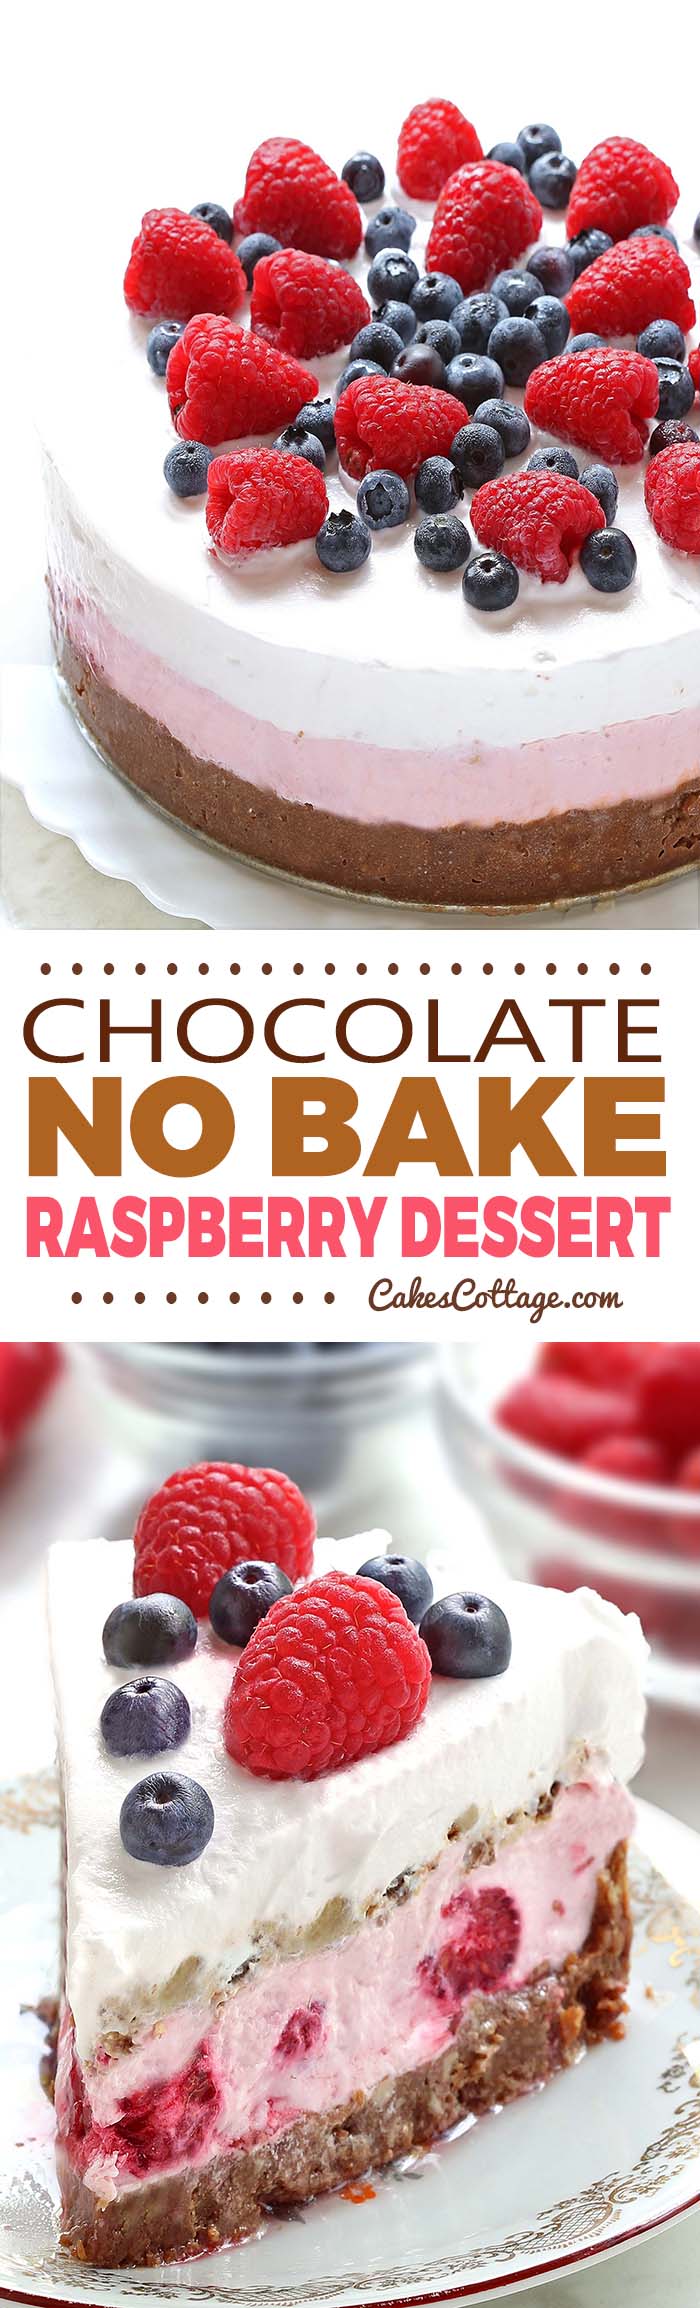 Looking for a quick, easy and refreshing Summer dessert recipe? Try out delicious No Bake Chocolate Raspberry Dessert !